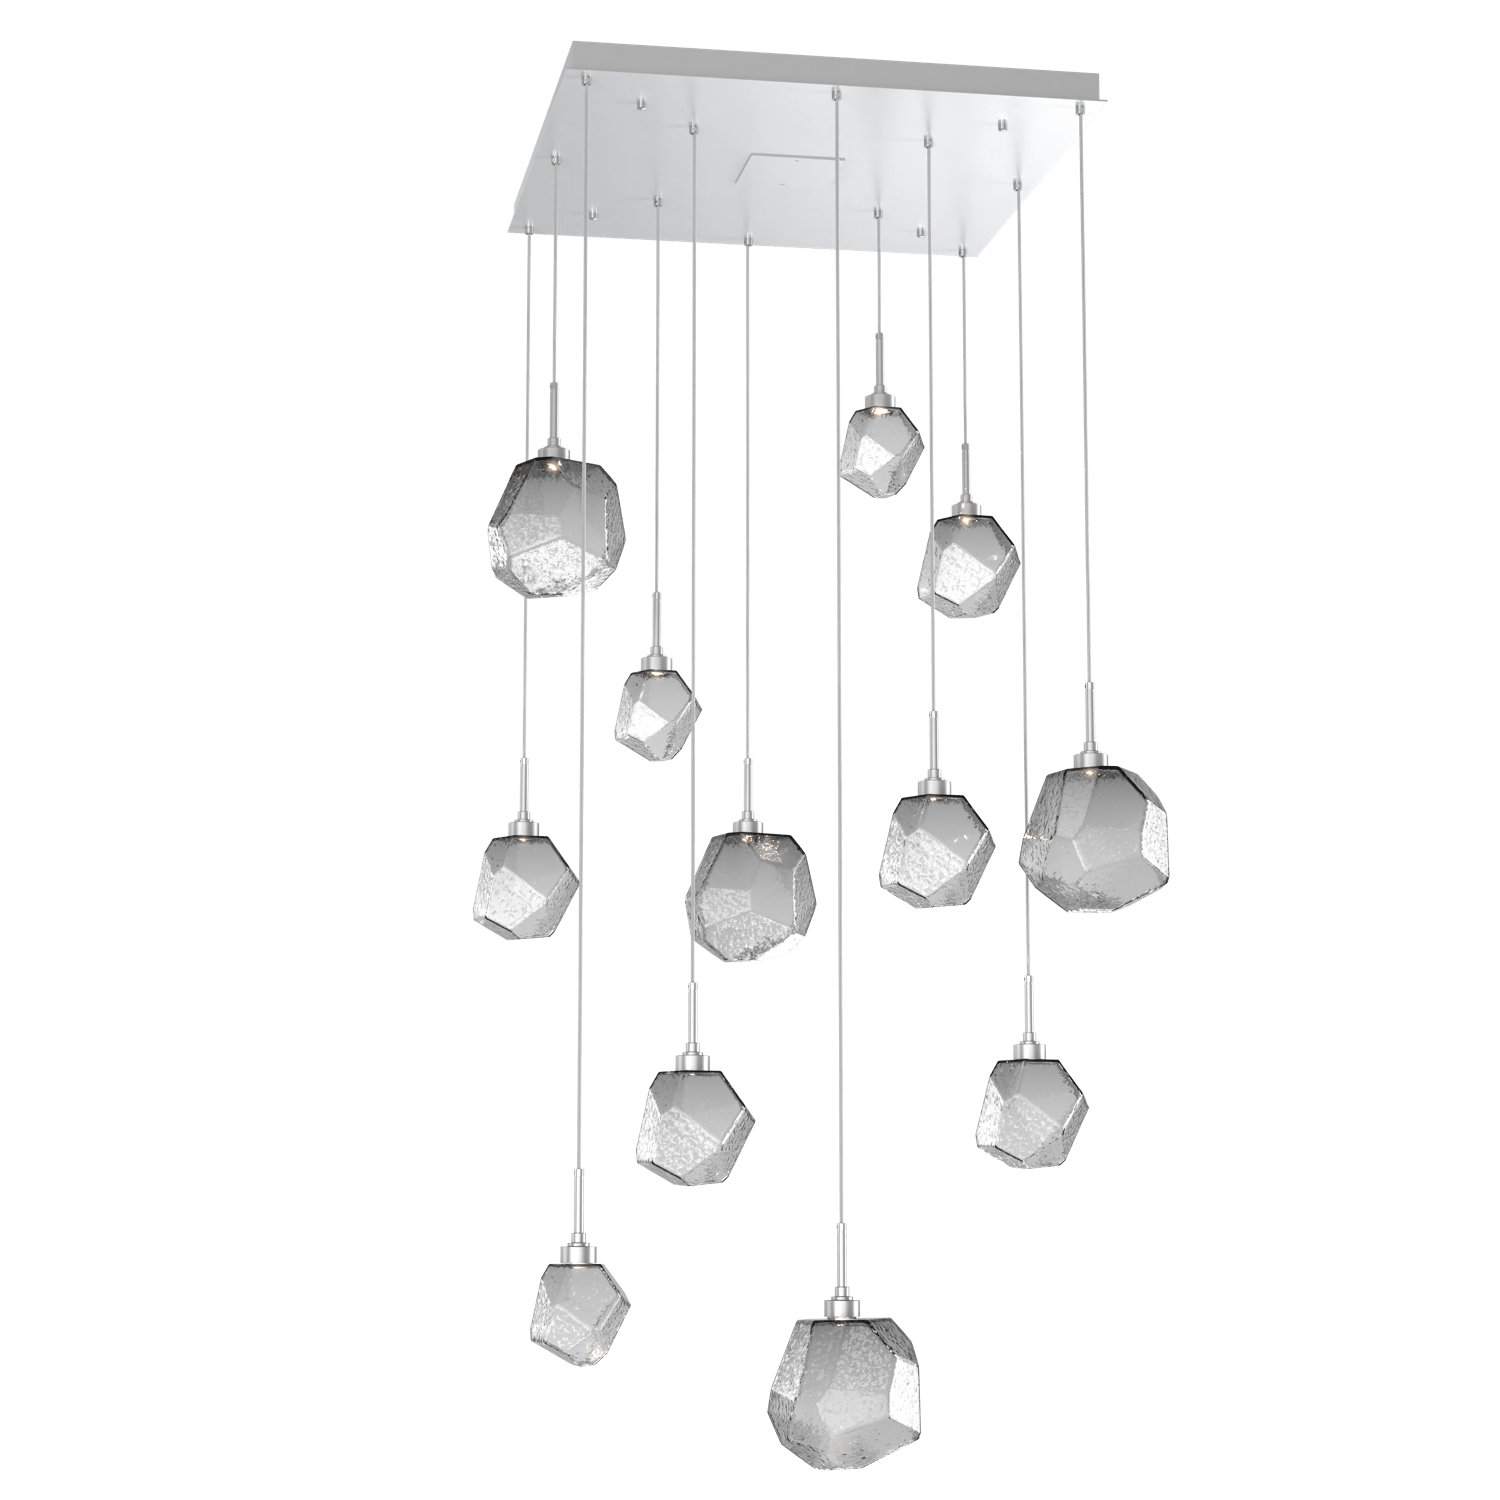 CHB0039-12-CS-S-Hammerton-Studio-Gem-12-light-square-pendant-chandelier-with-classic-silver-finish-and-smoke-blown-glass-shades-and-LED-lamping